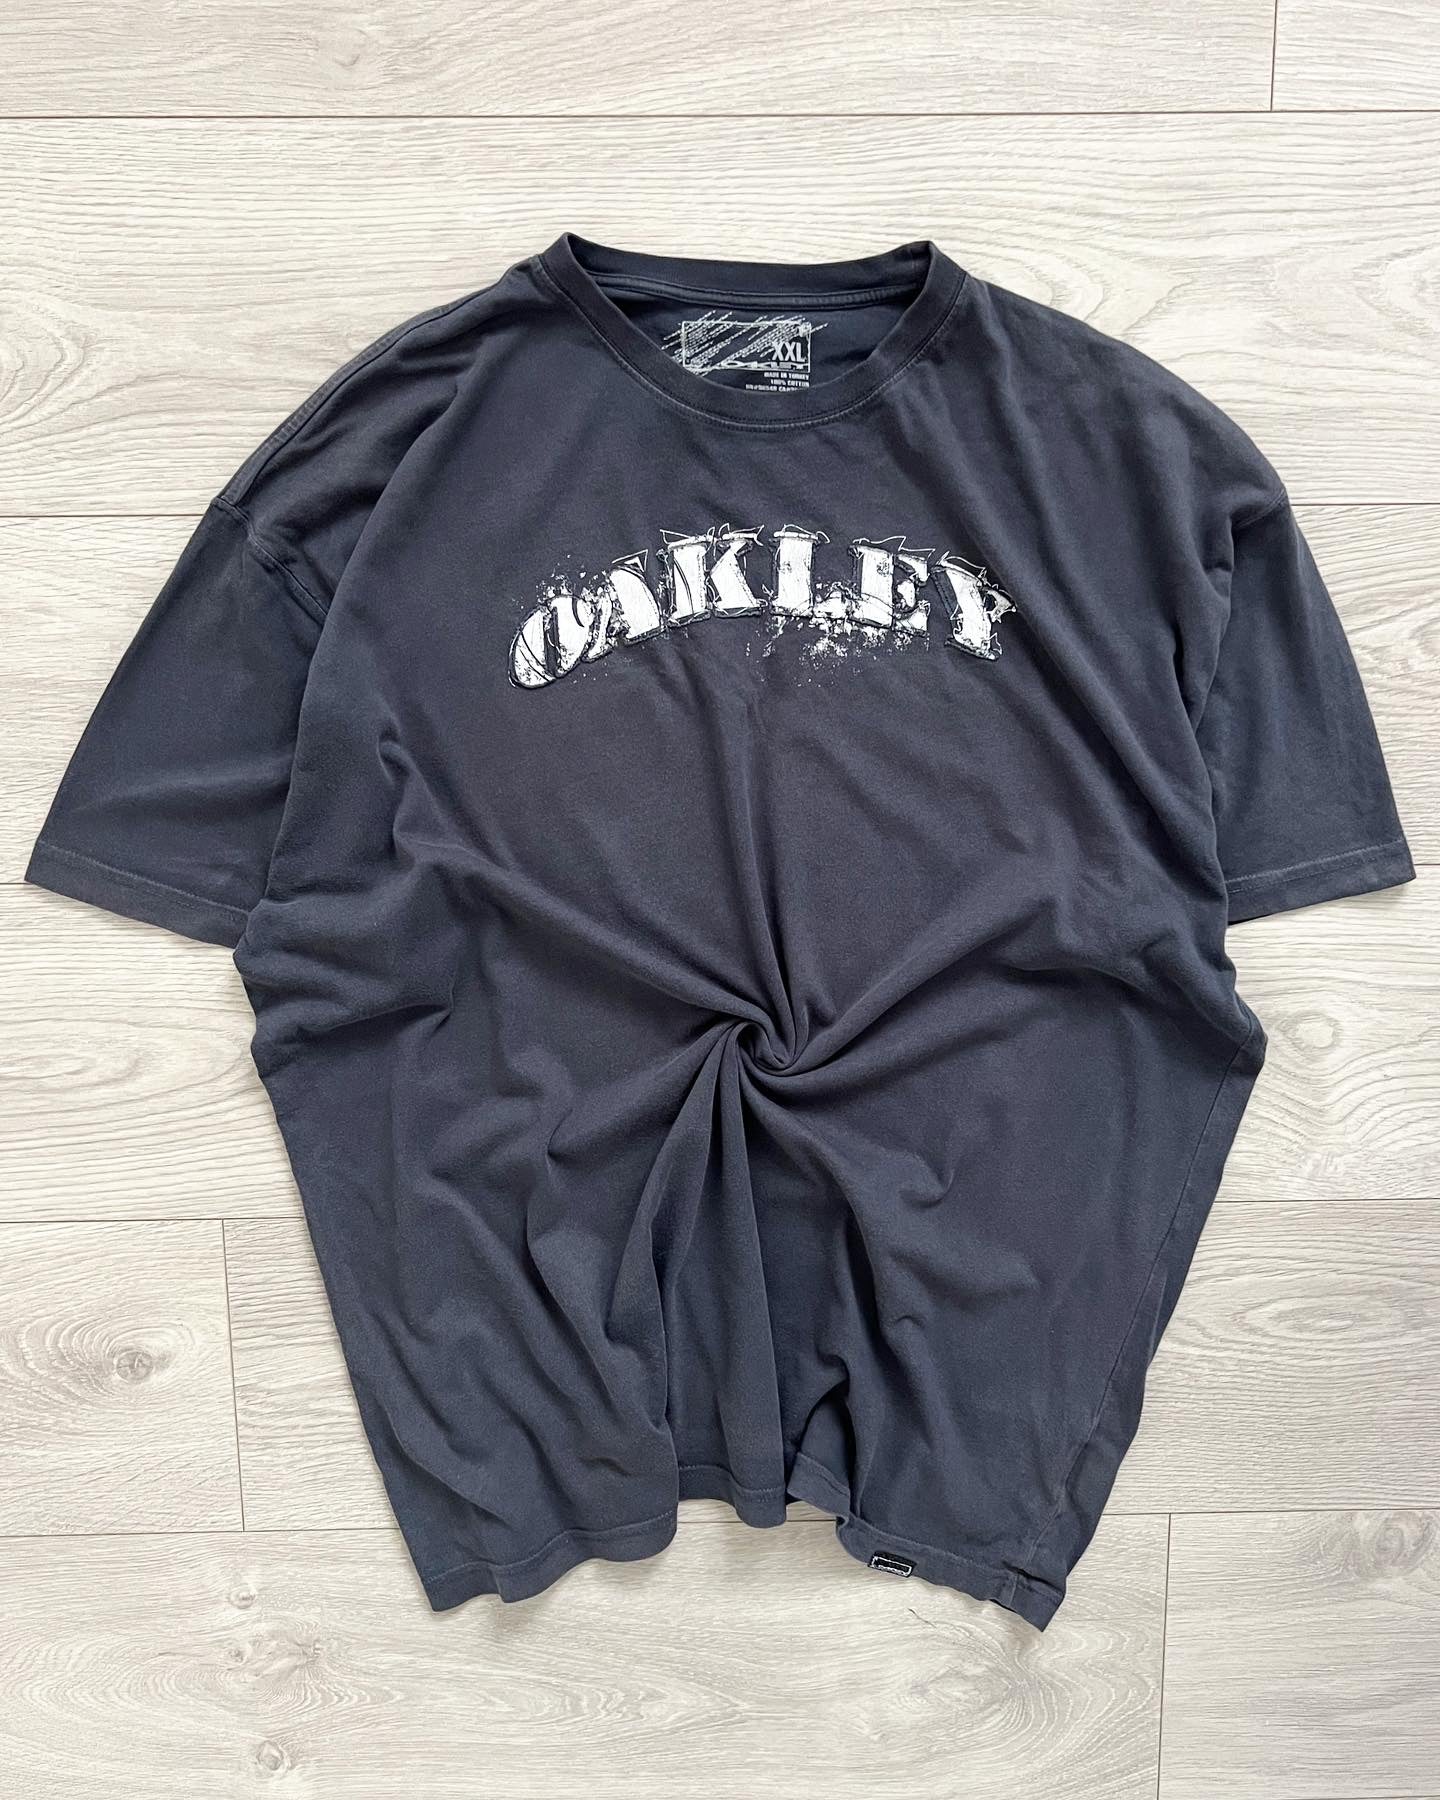 Oakley 2000s Vintage Spell Out Logo T-Shirt - Size XXL